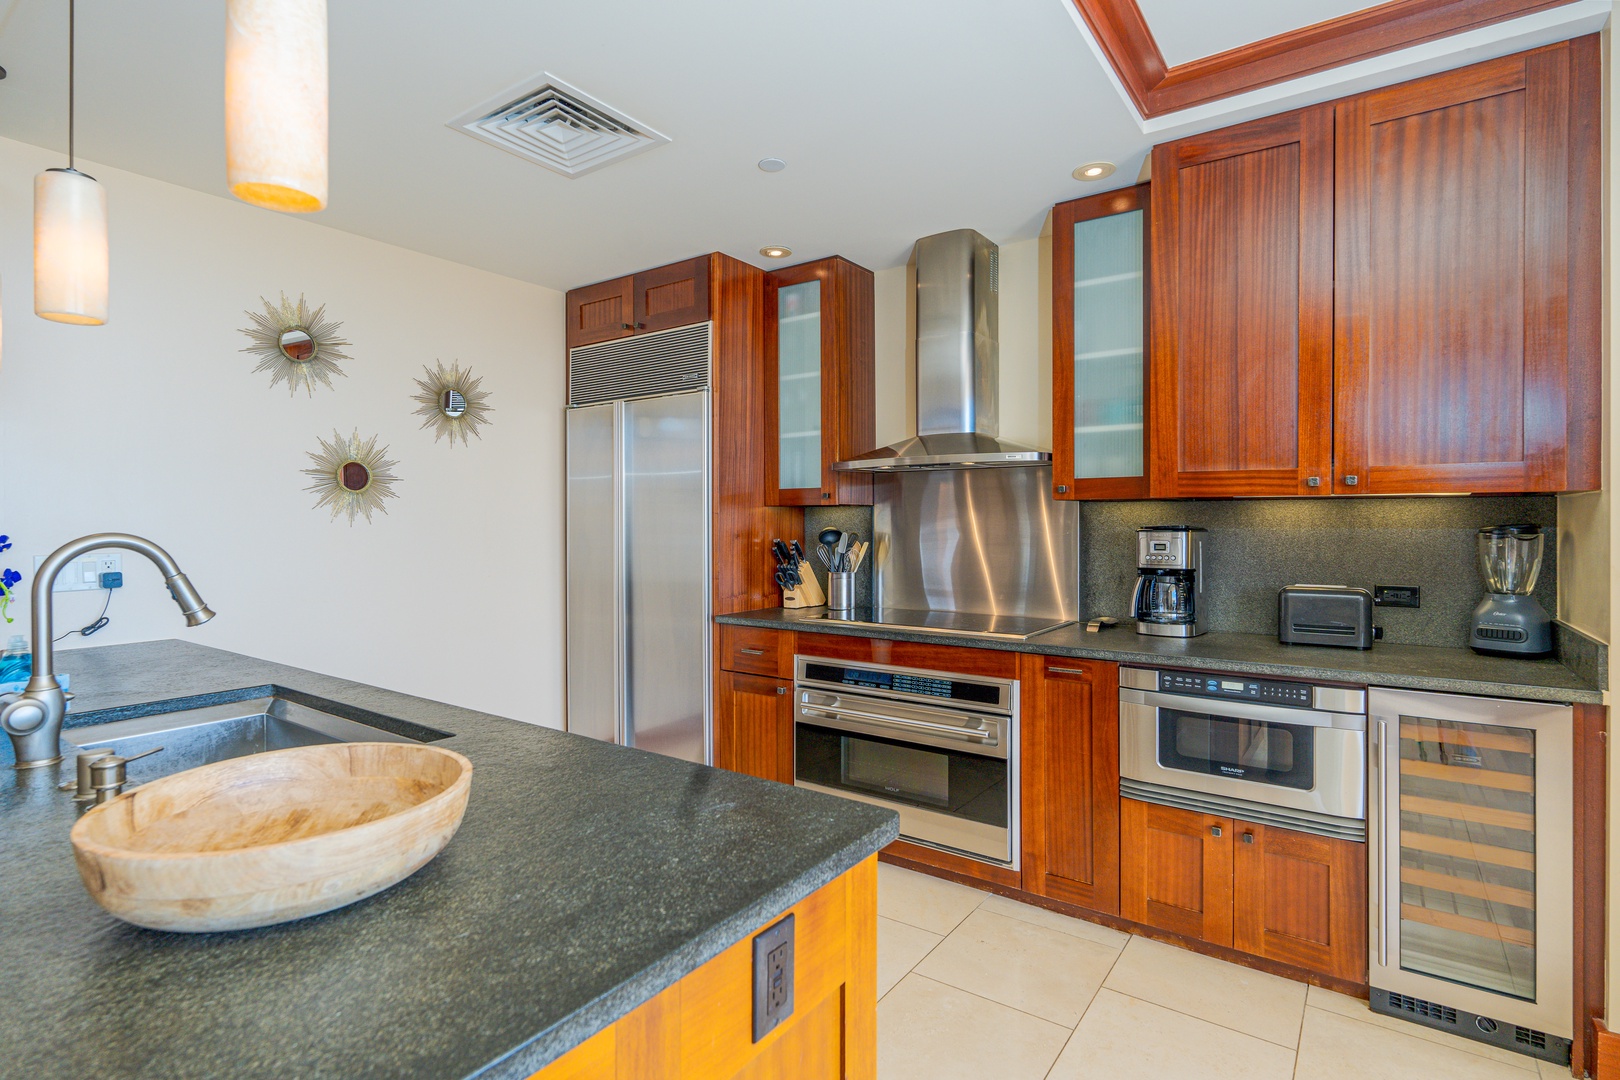 Kapolei Vacation Rentals, Ko Olina Beach Villas O904 - All the kitchen amenities you need for your culinary adventures.